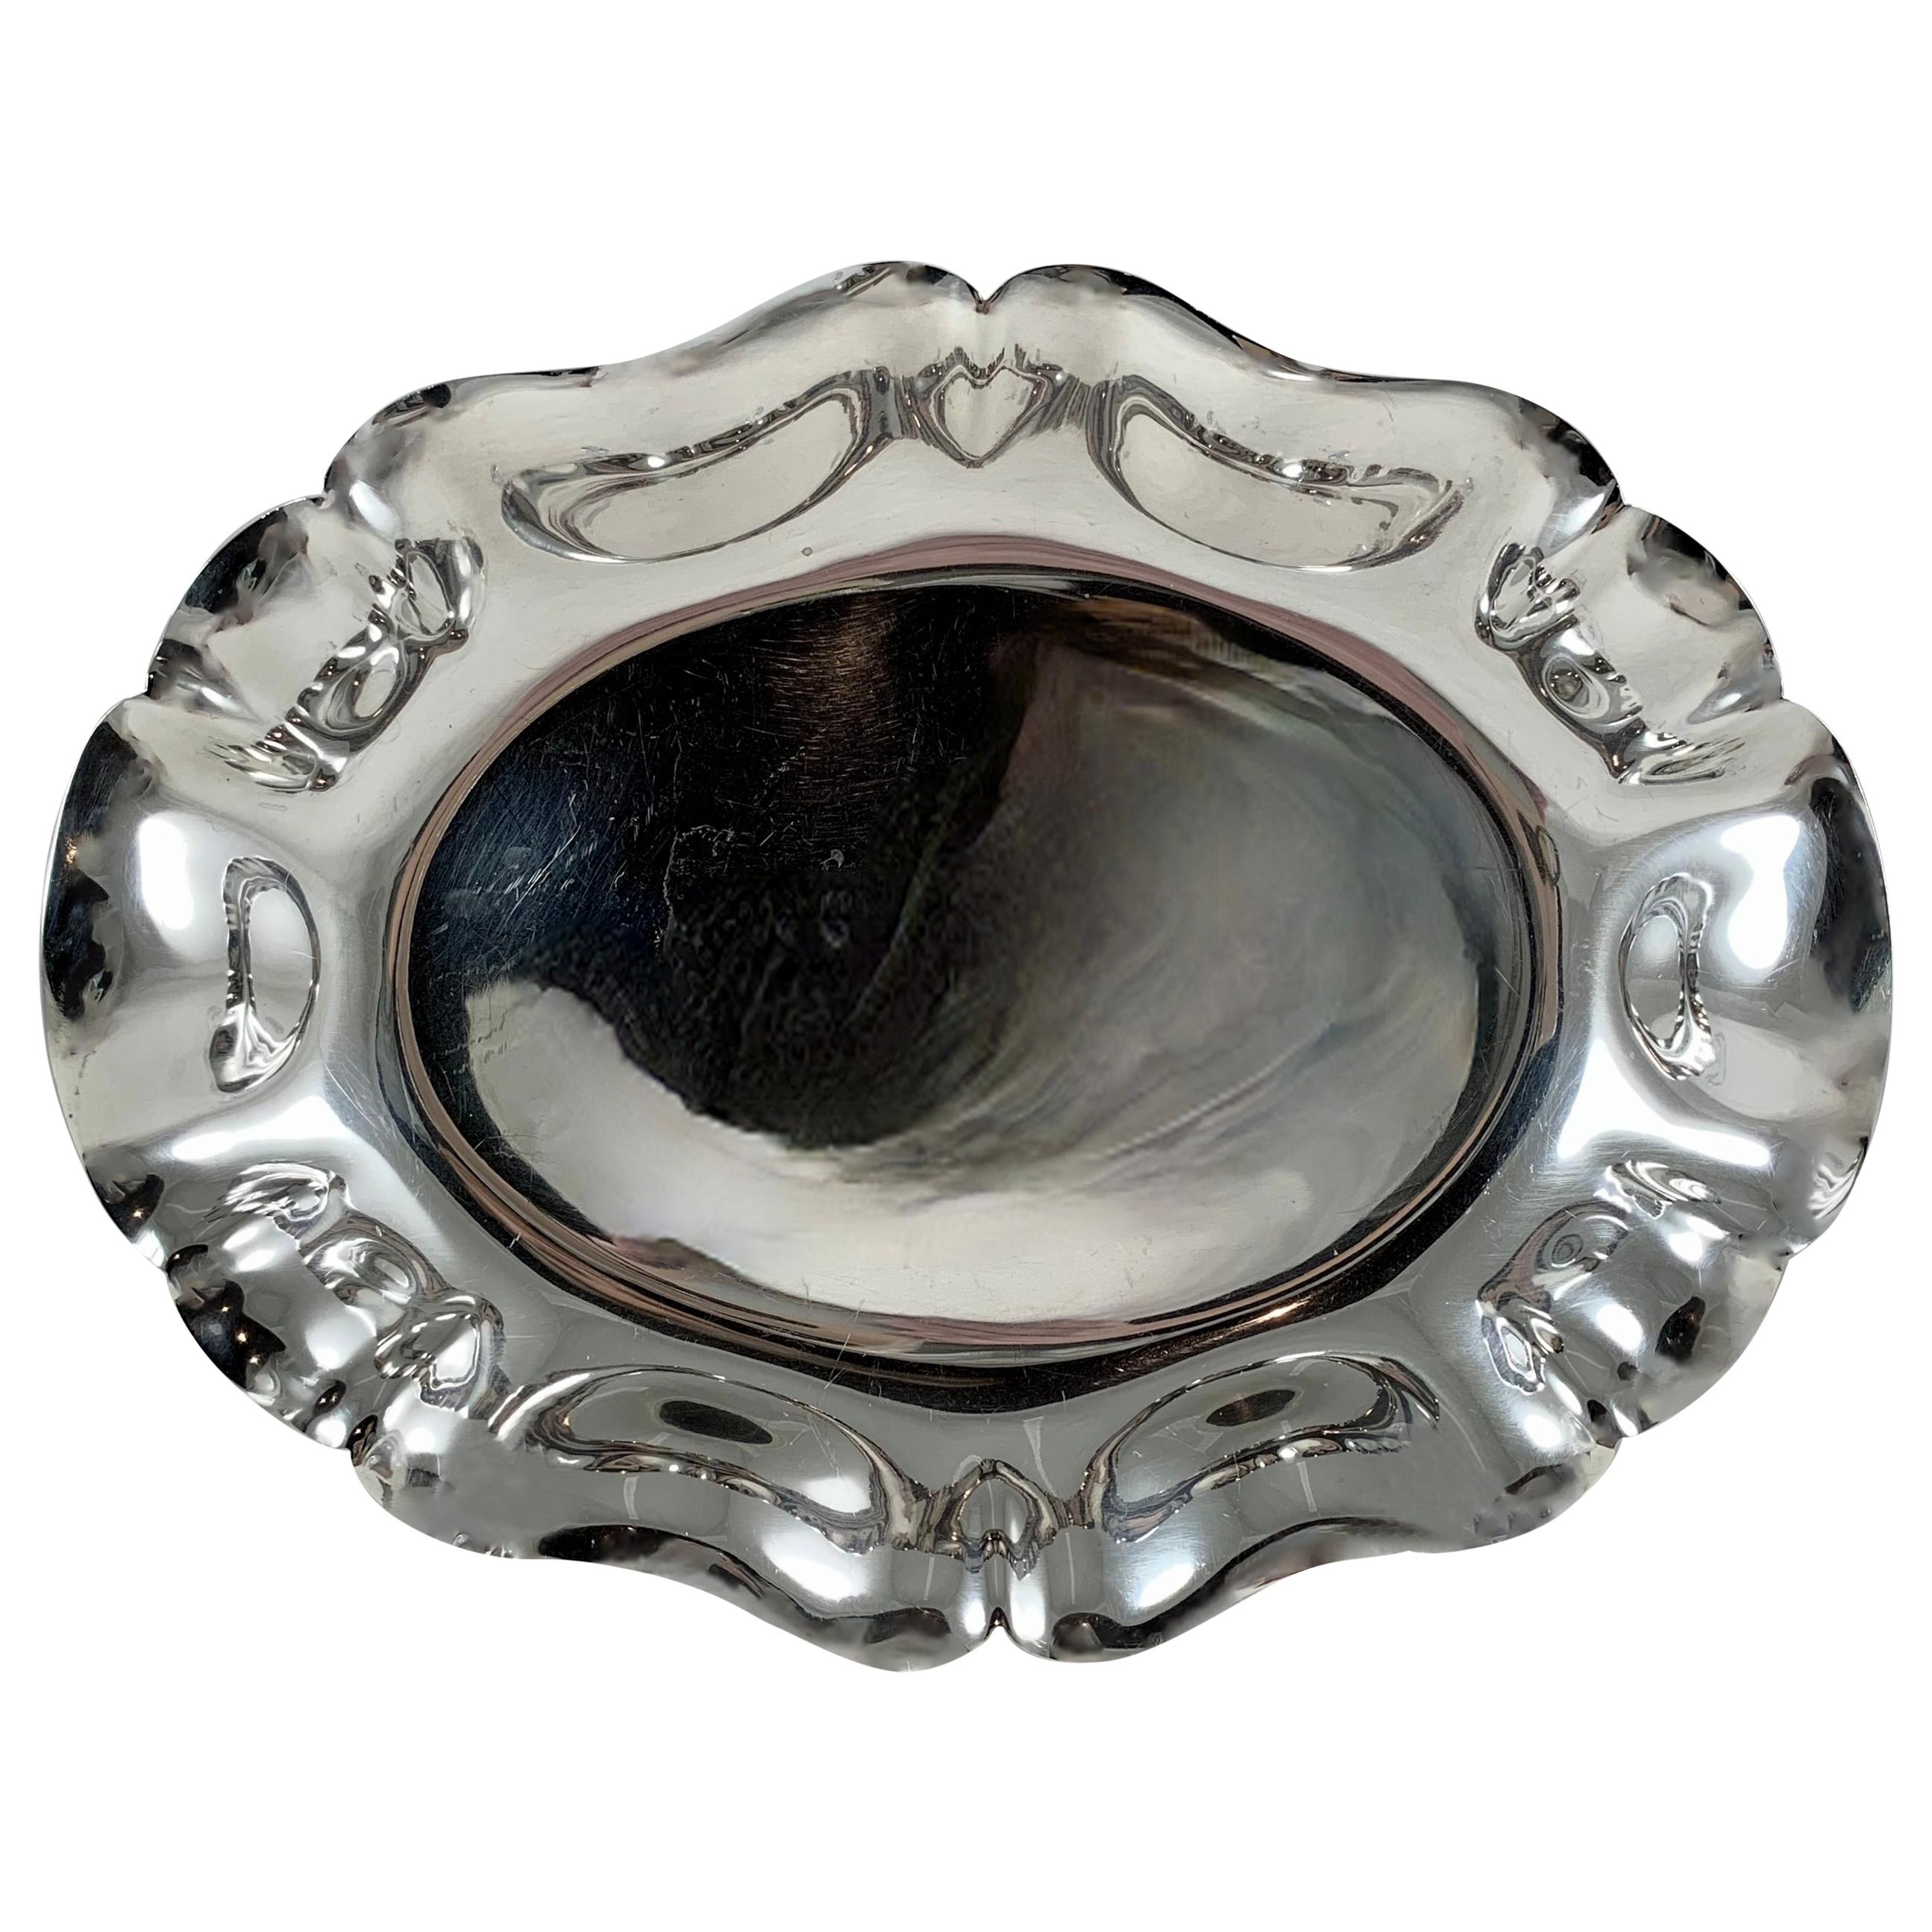 S. Kirk & Son Sterling Silver Ruffled Rim Oval Celery Relish Tray, circa 1940s